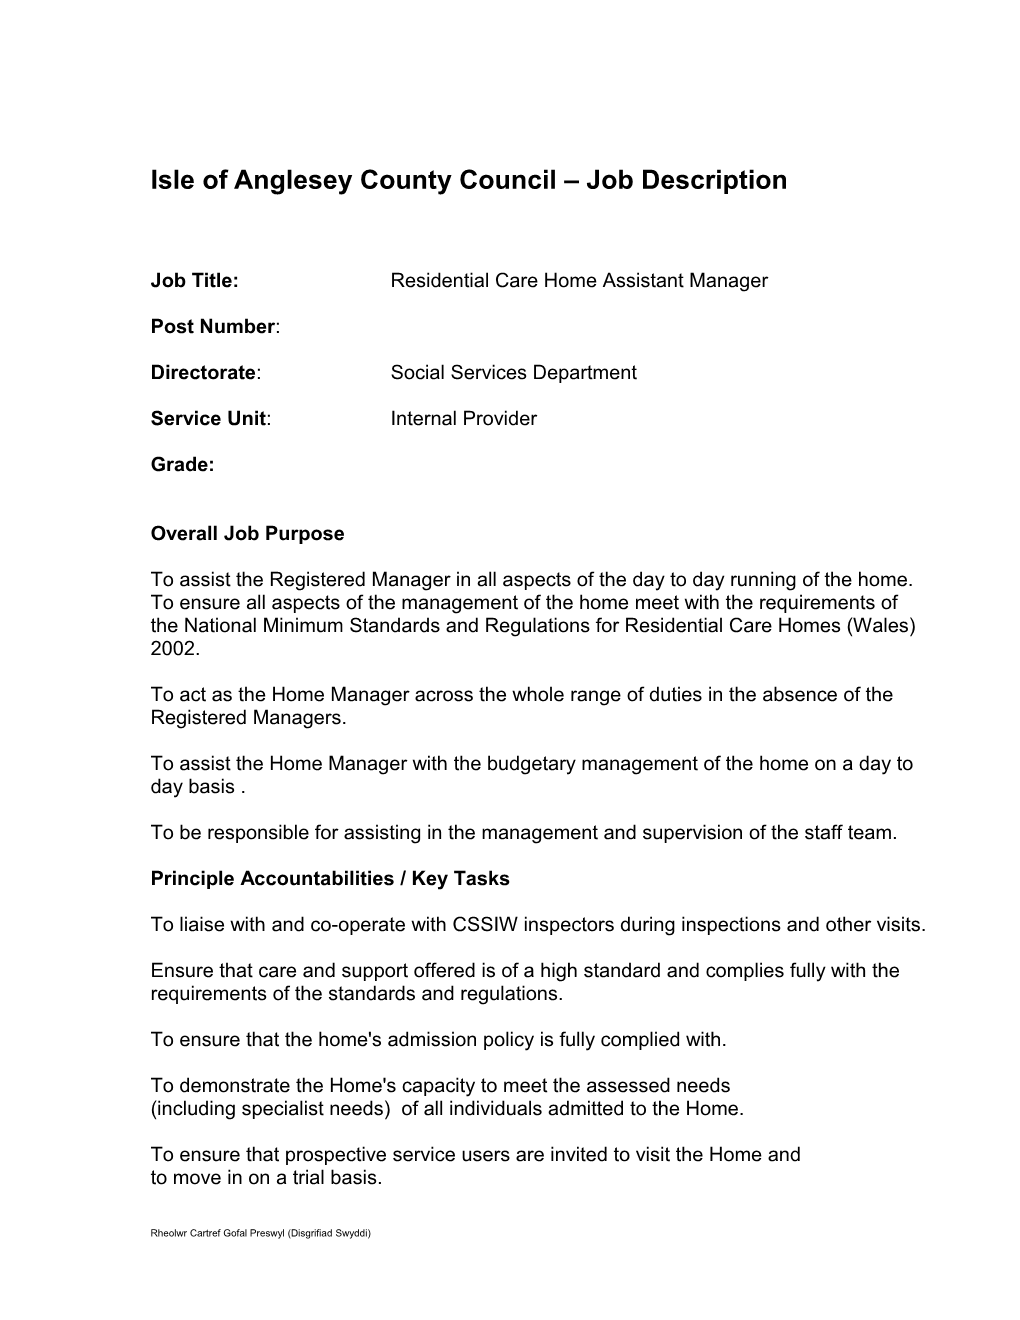 Isle of Anglesey County Council Job Description